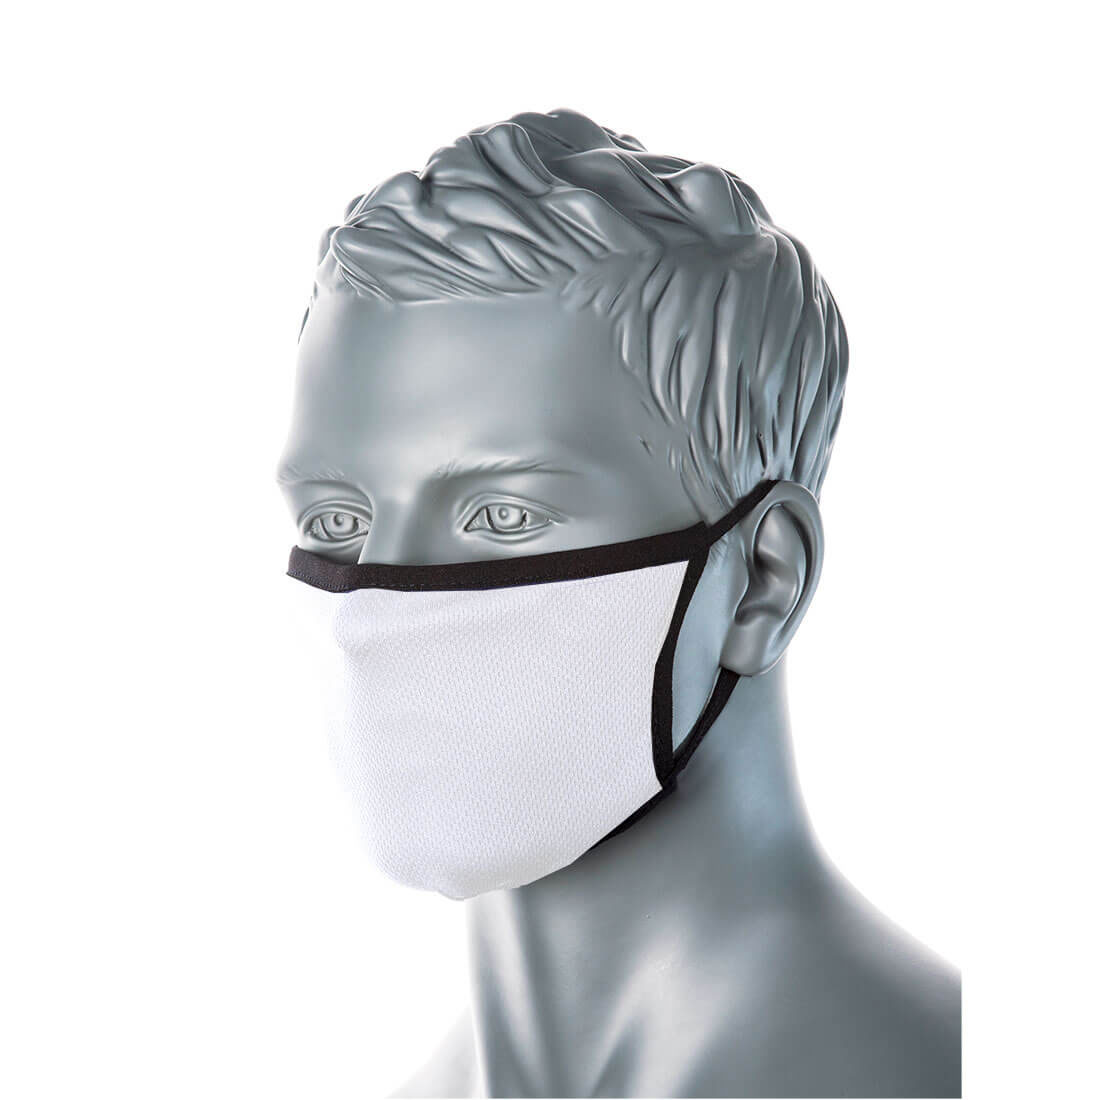 Breathable 3-Ply Fabric Face Mask